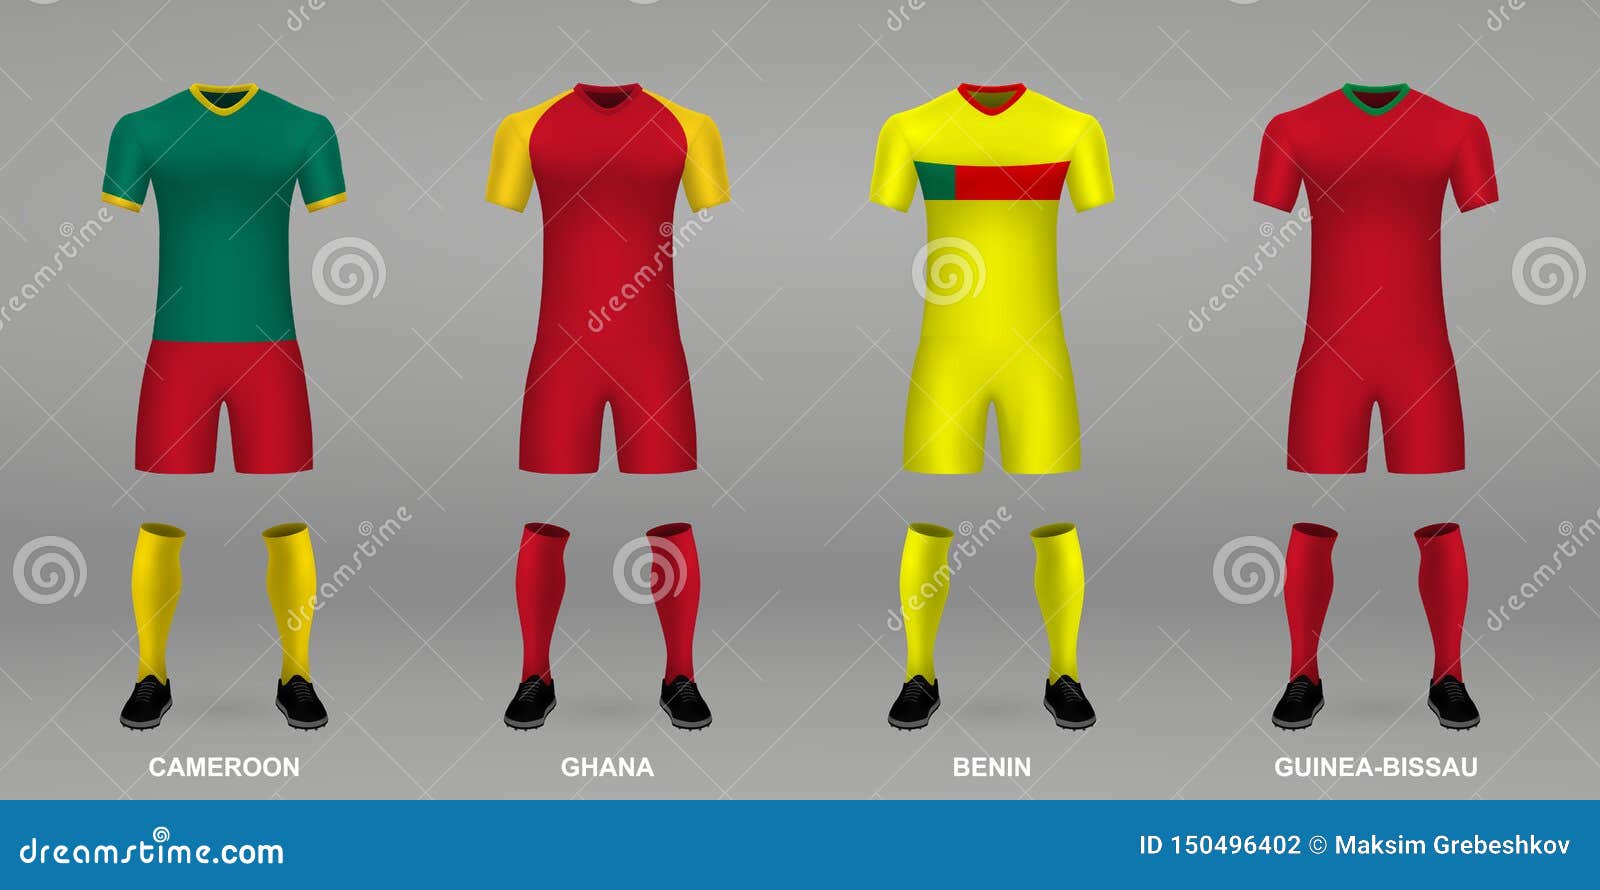 World Cup football jersey stock vector. Illustration of chile - 14851885